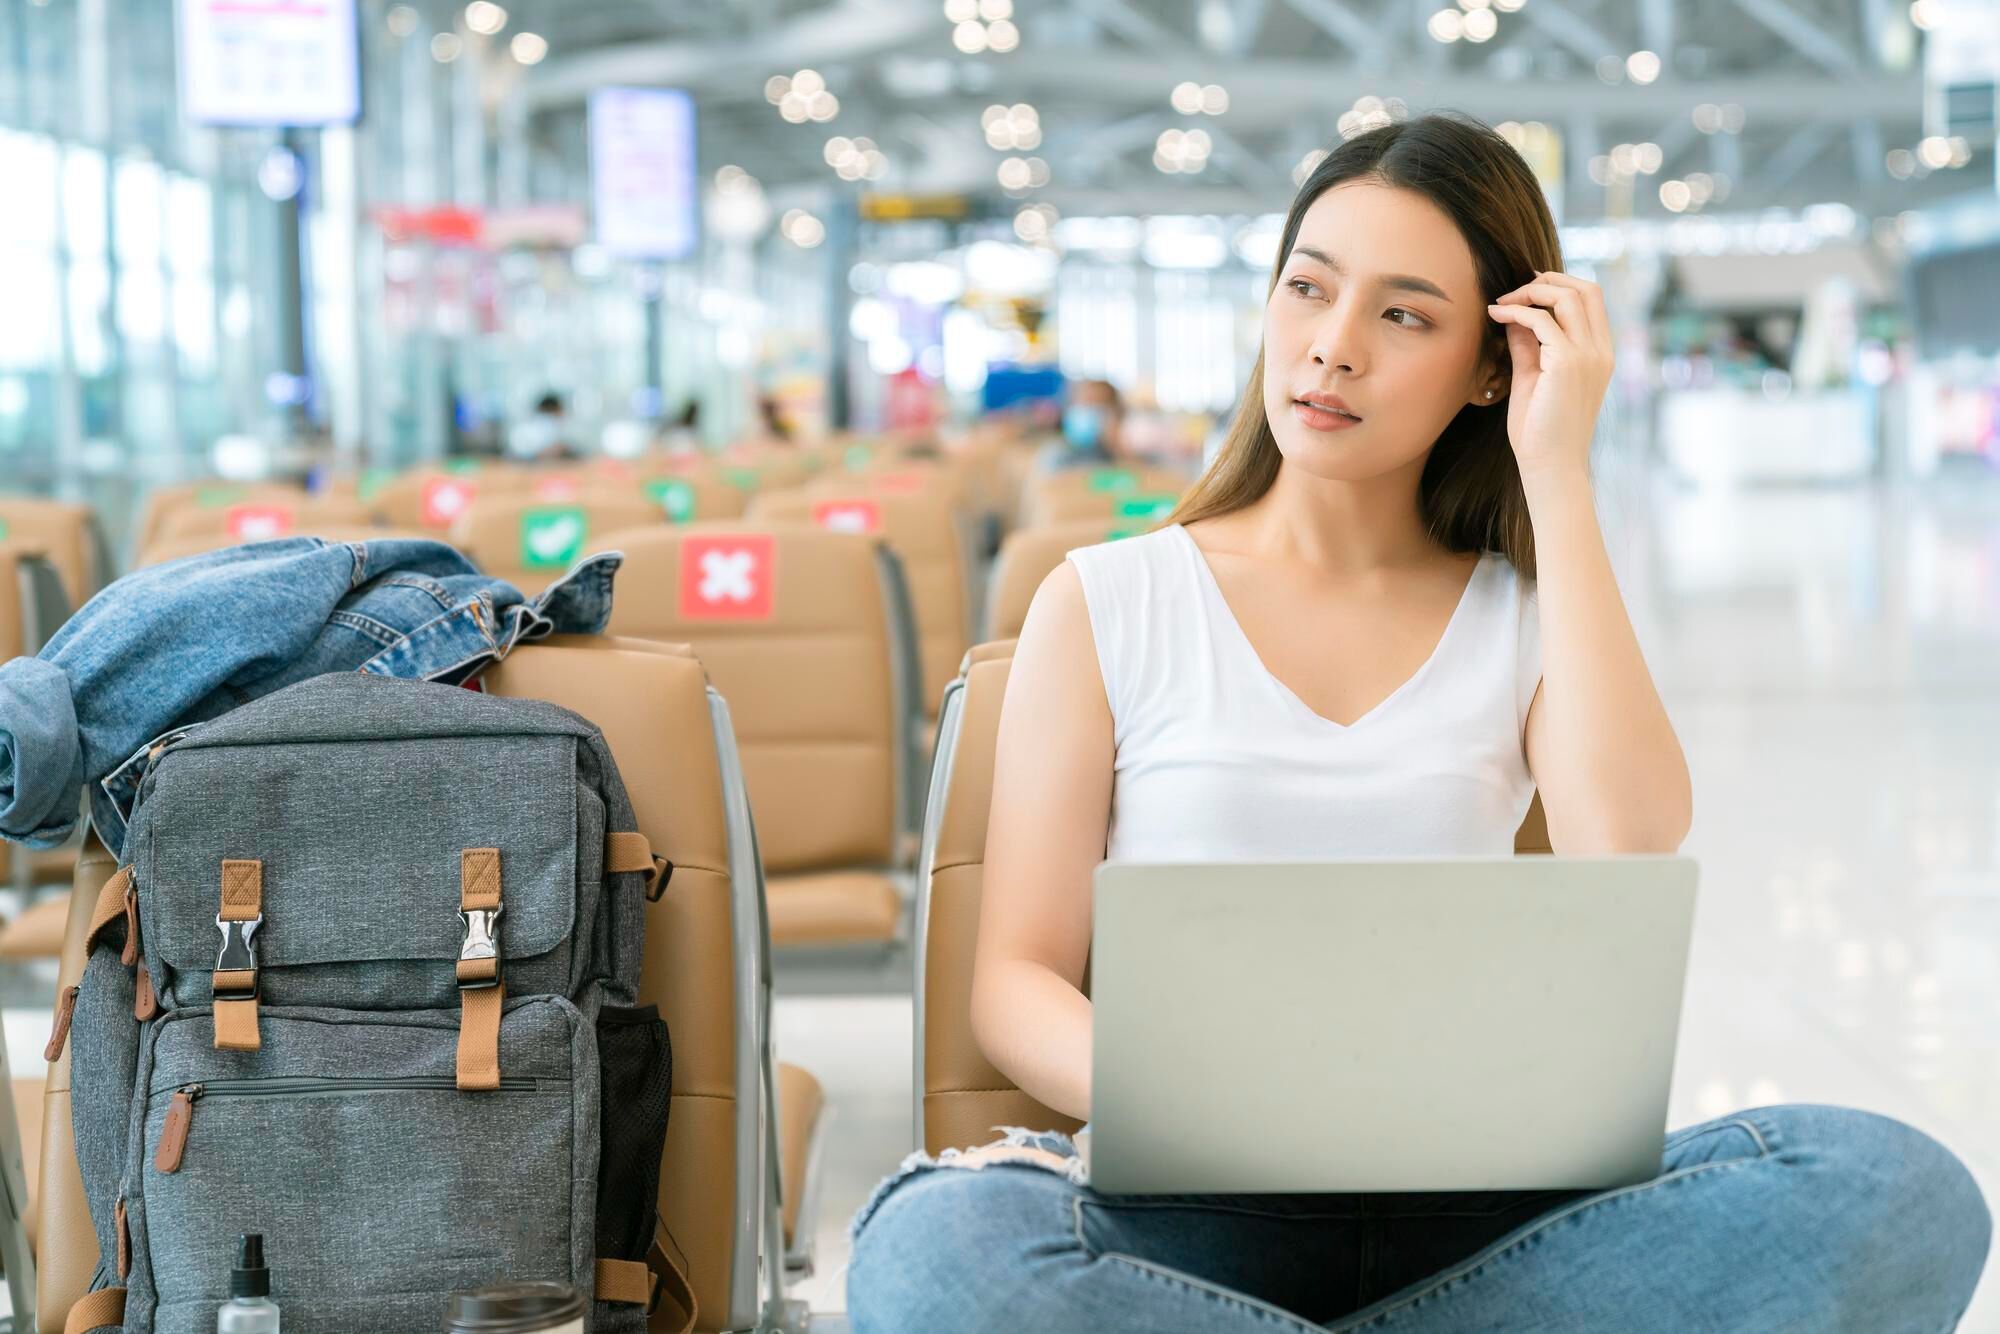 7 types of people you don't want to meet at the airport